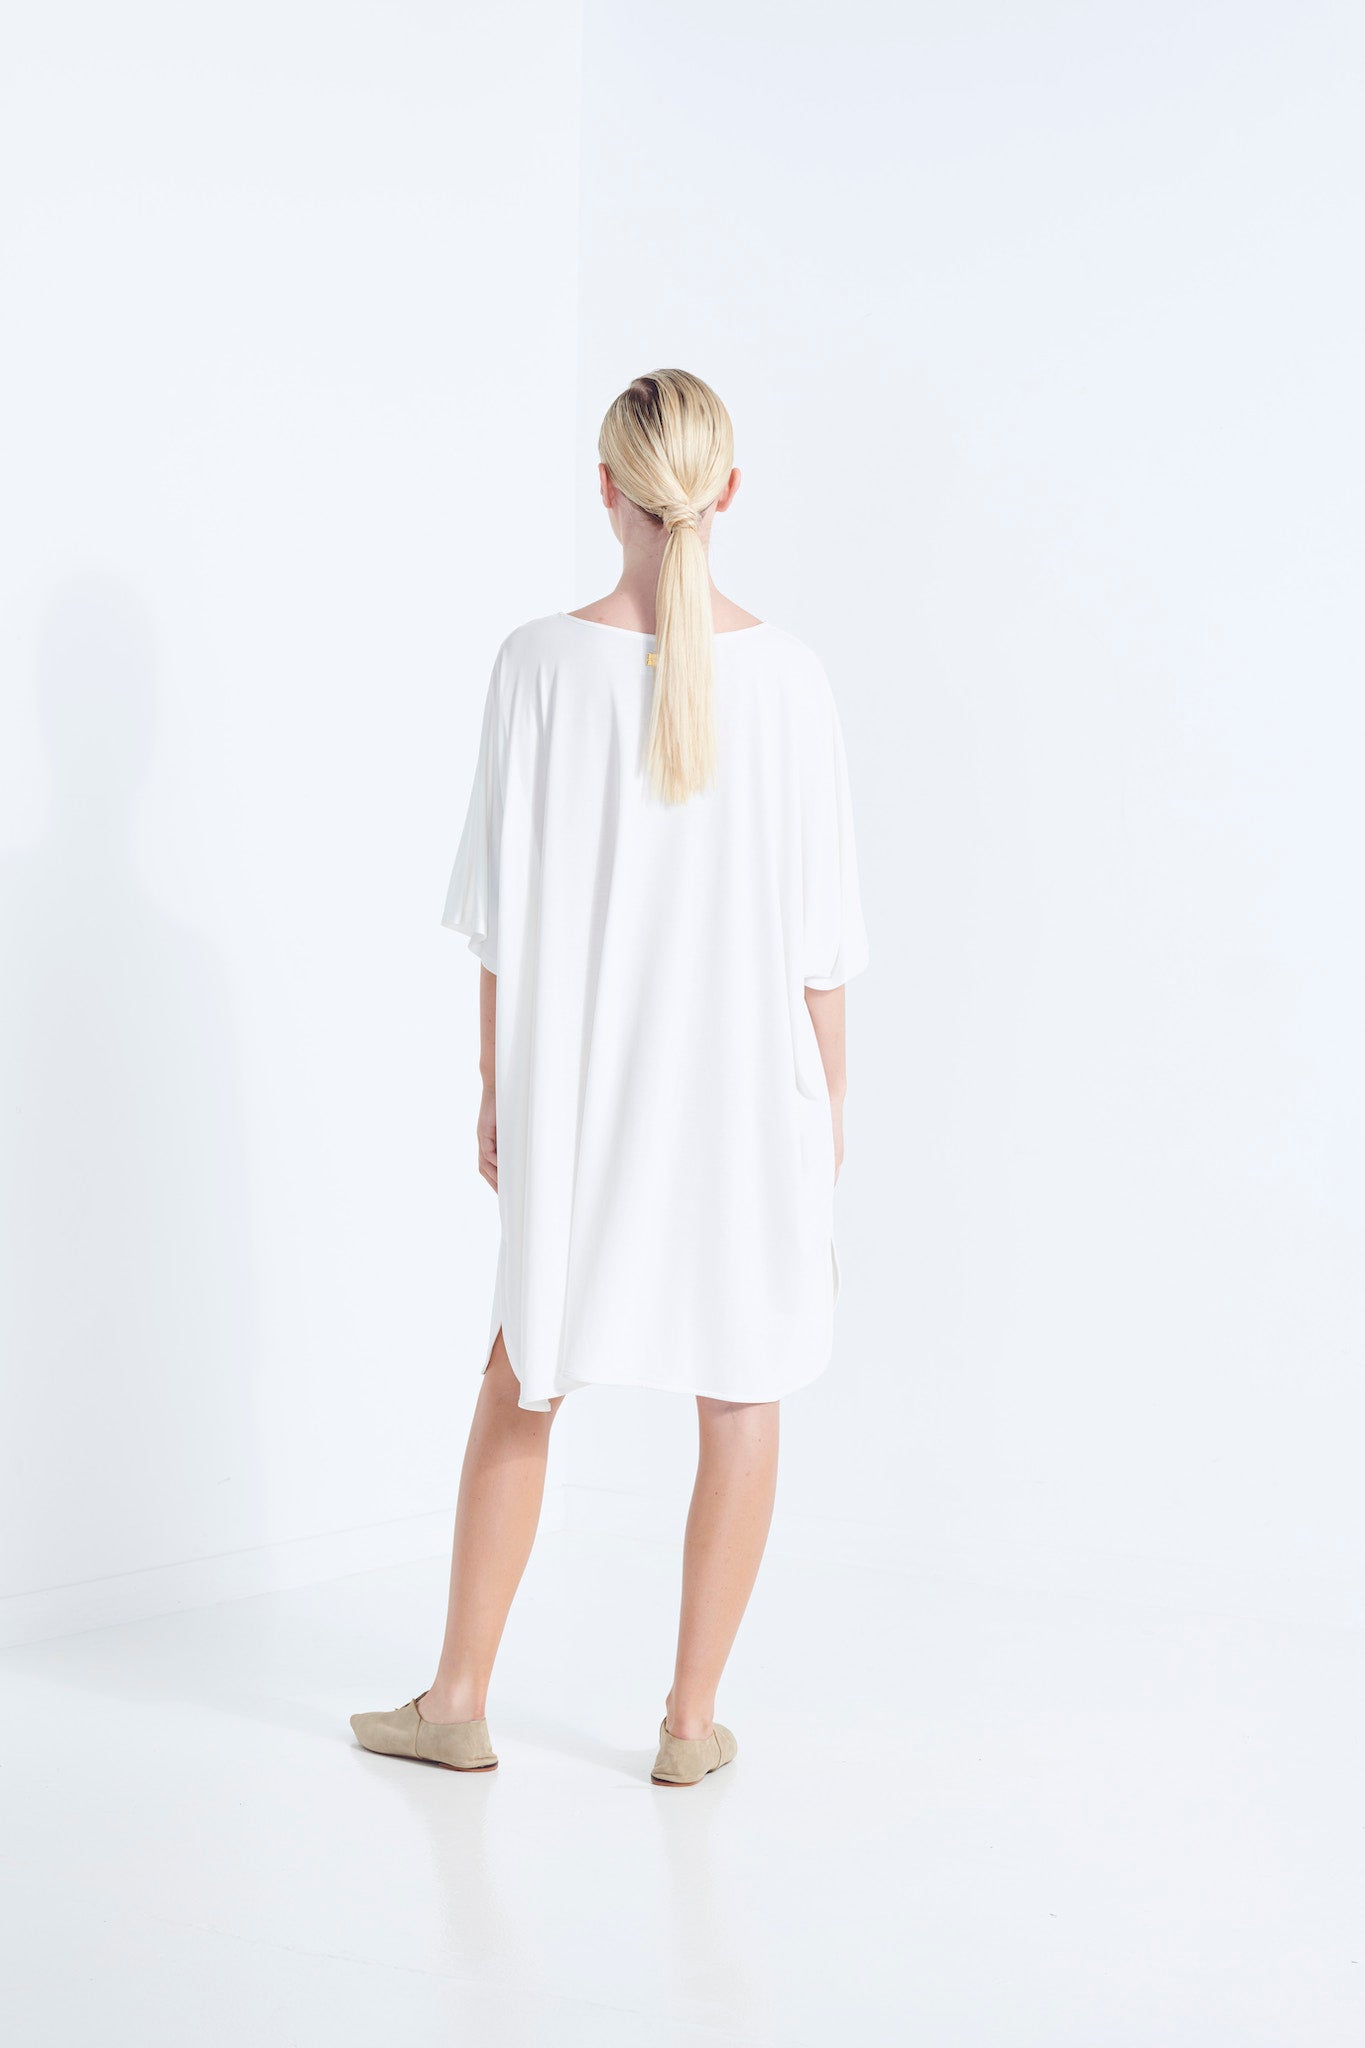 THEMIS DRESS LONGLINE T-SHIRT BEECHWOOD MODAL STRETCH WITH REMOVABLE TIE DEW MILKY WHITE  BACK VIEW